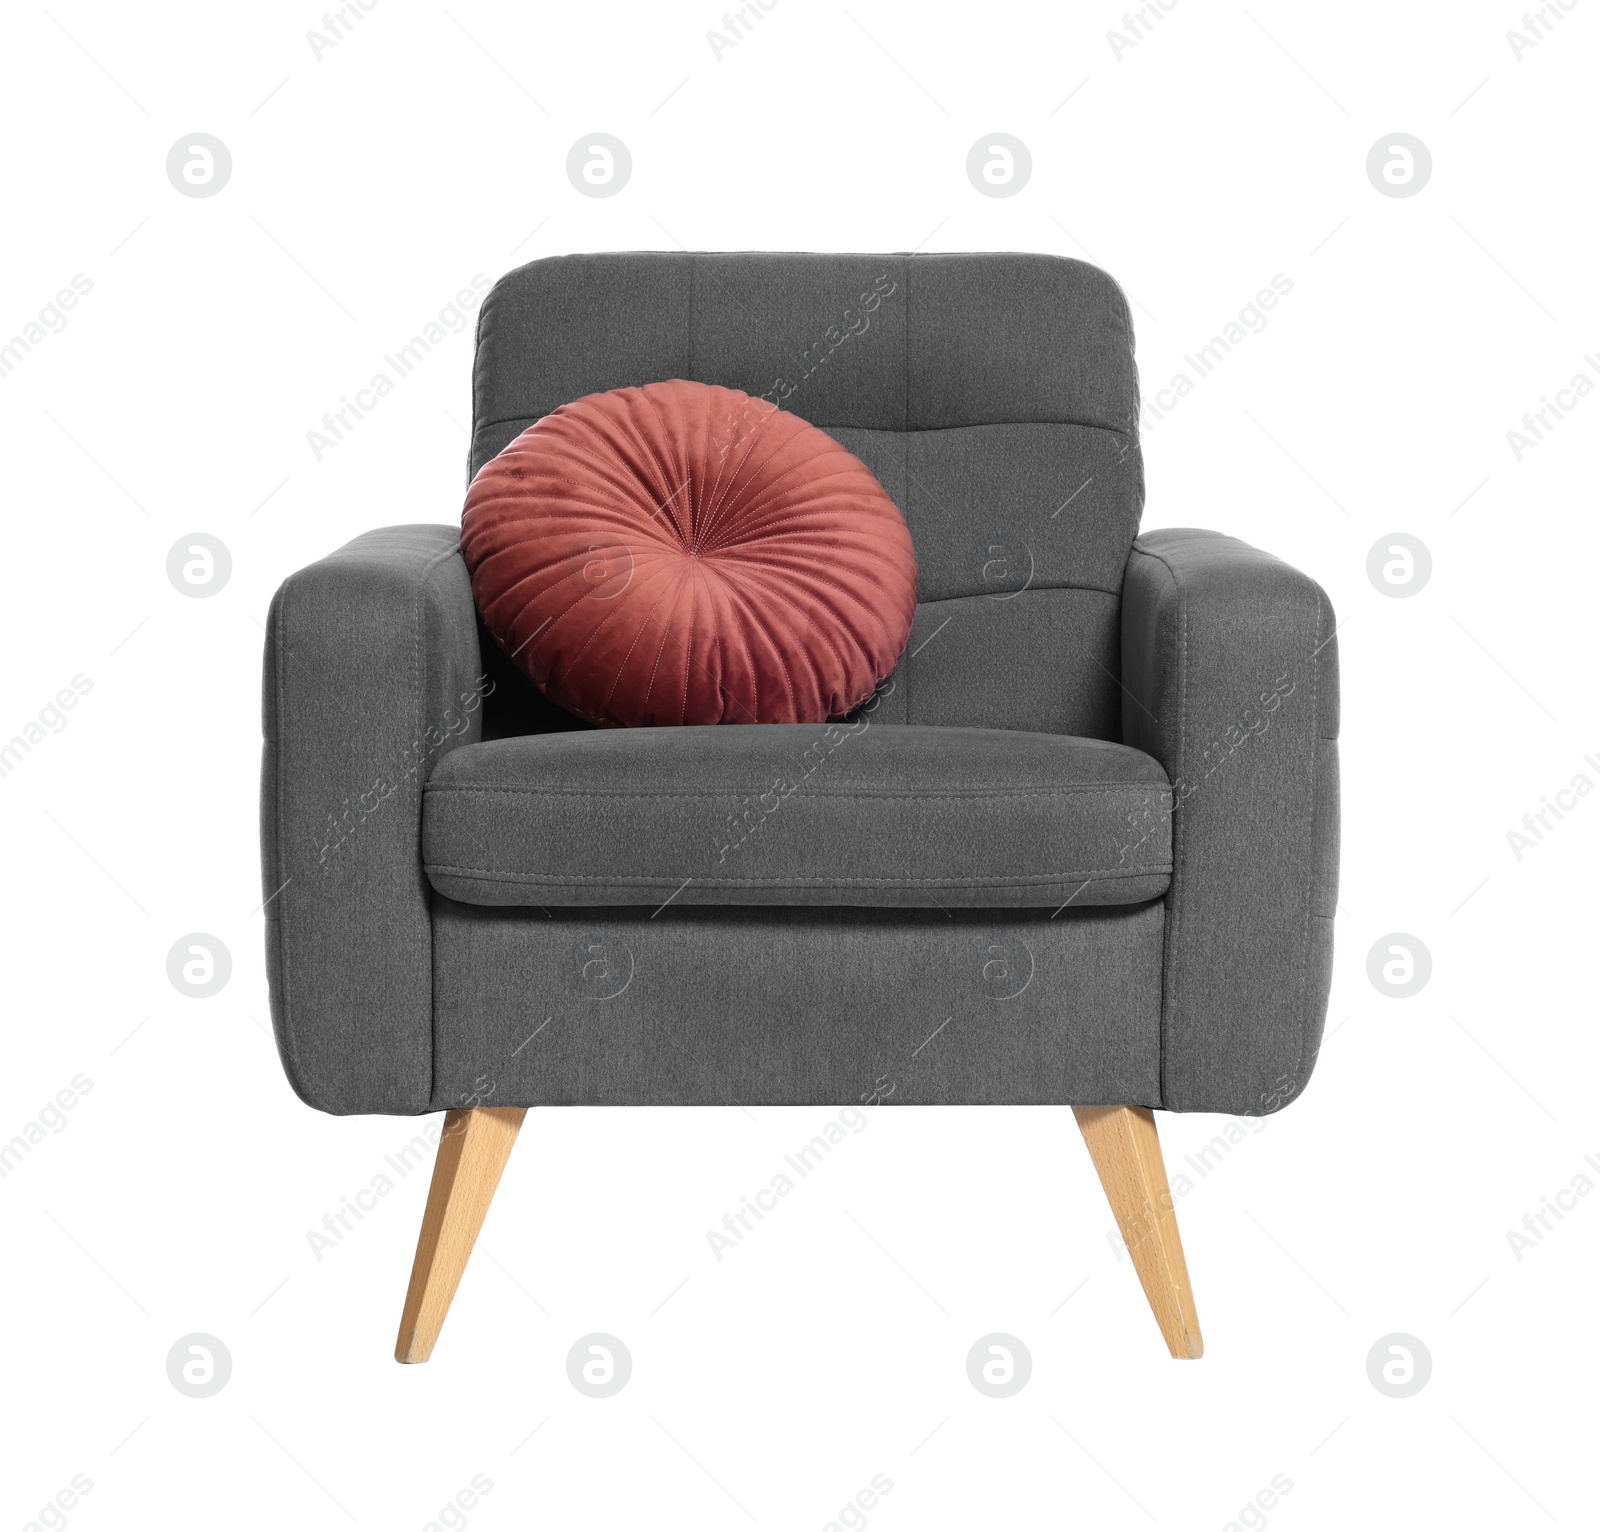 Photo of One grey armchair with pillow isolated on white